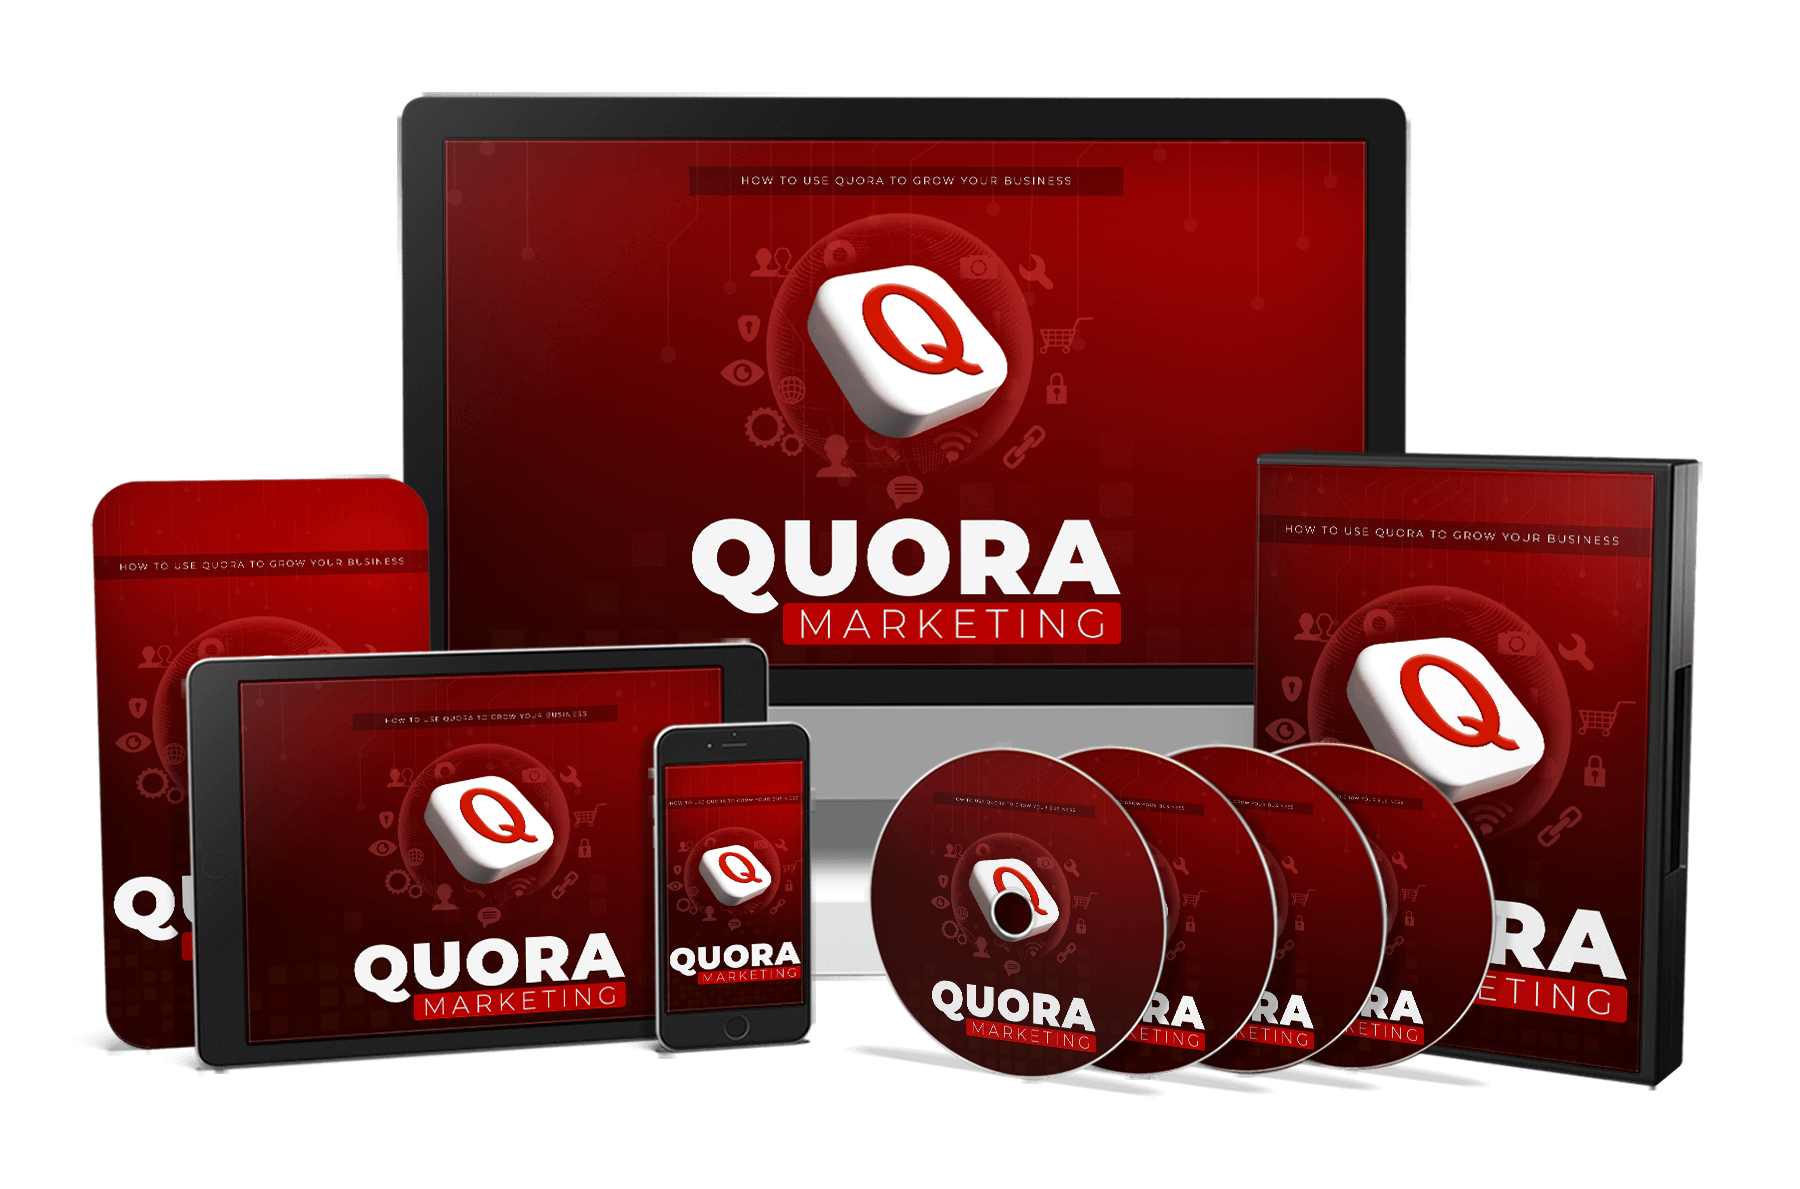 Quora Marketing (PLR Training guide) – Grow your business with Quora in 2022